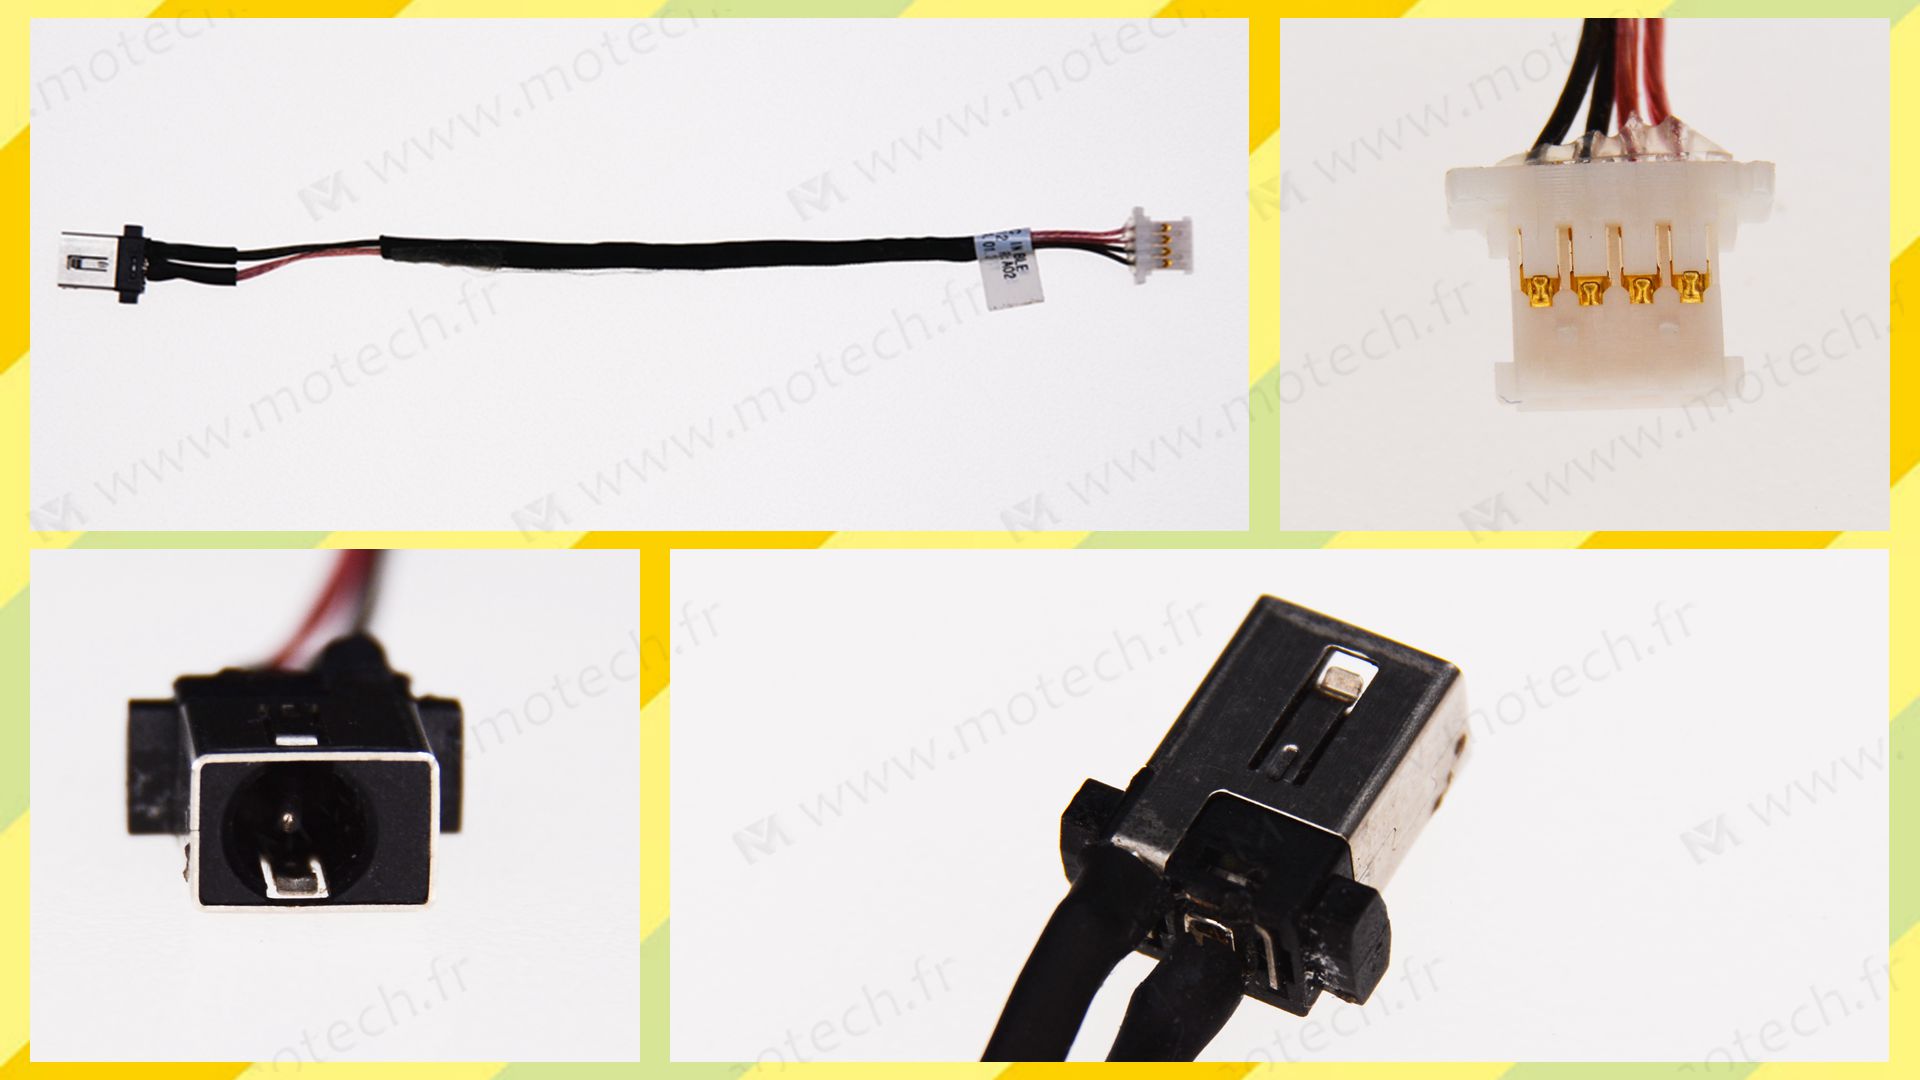 Acer S3-392G charging connector, Acer S3-392G DC Power Jack, Acer S3-392G DC IN Cable, Acer S3-392G Power Jack, Acer S3-392G plug, Acer S3-392G Jack socket, Acer S3-392G connecteur de charge, 